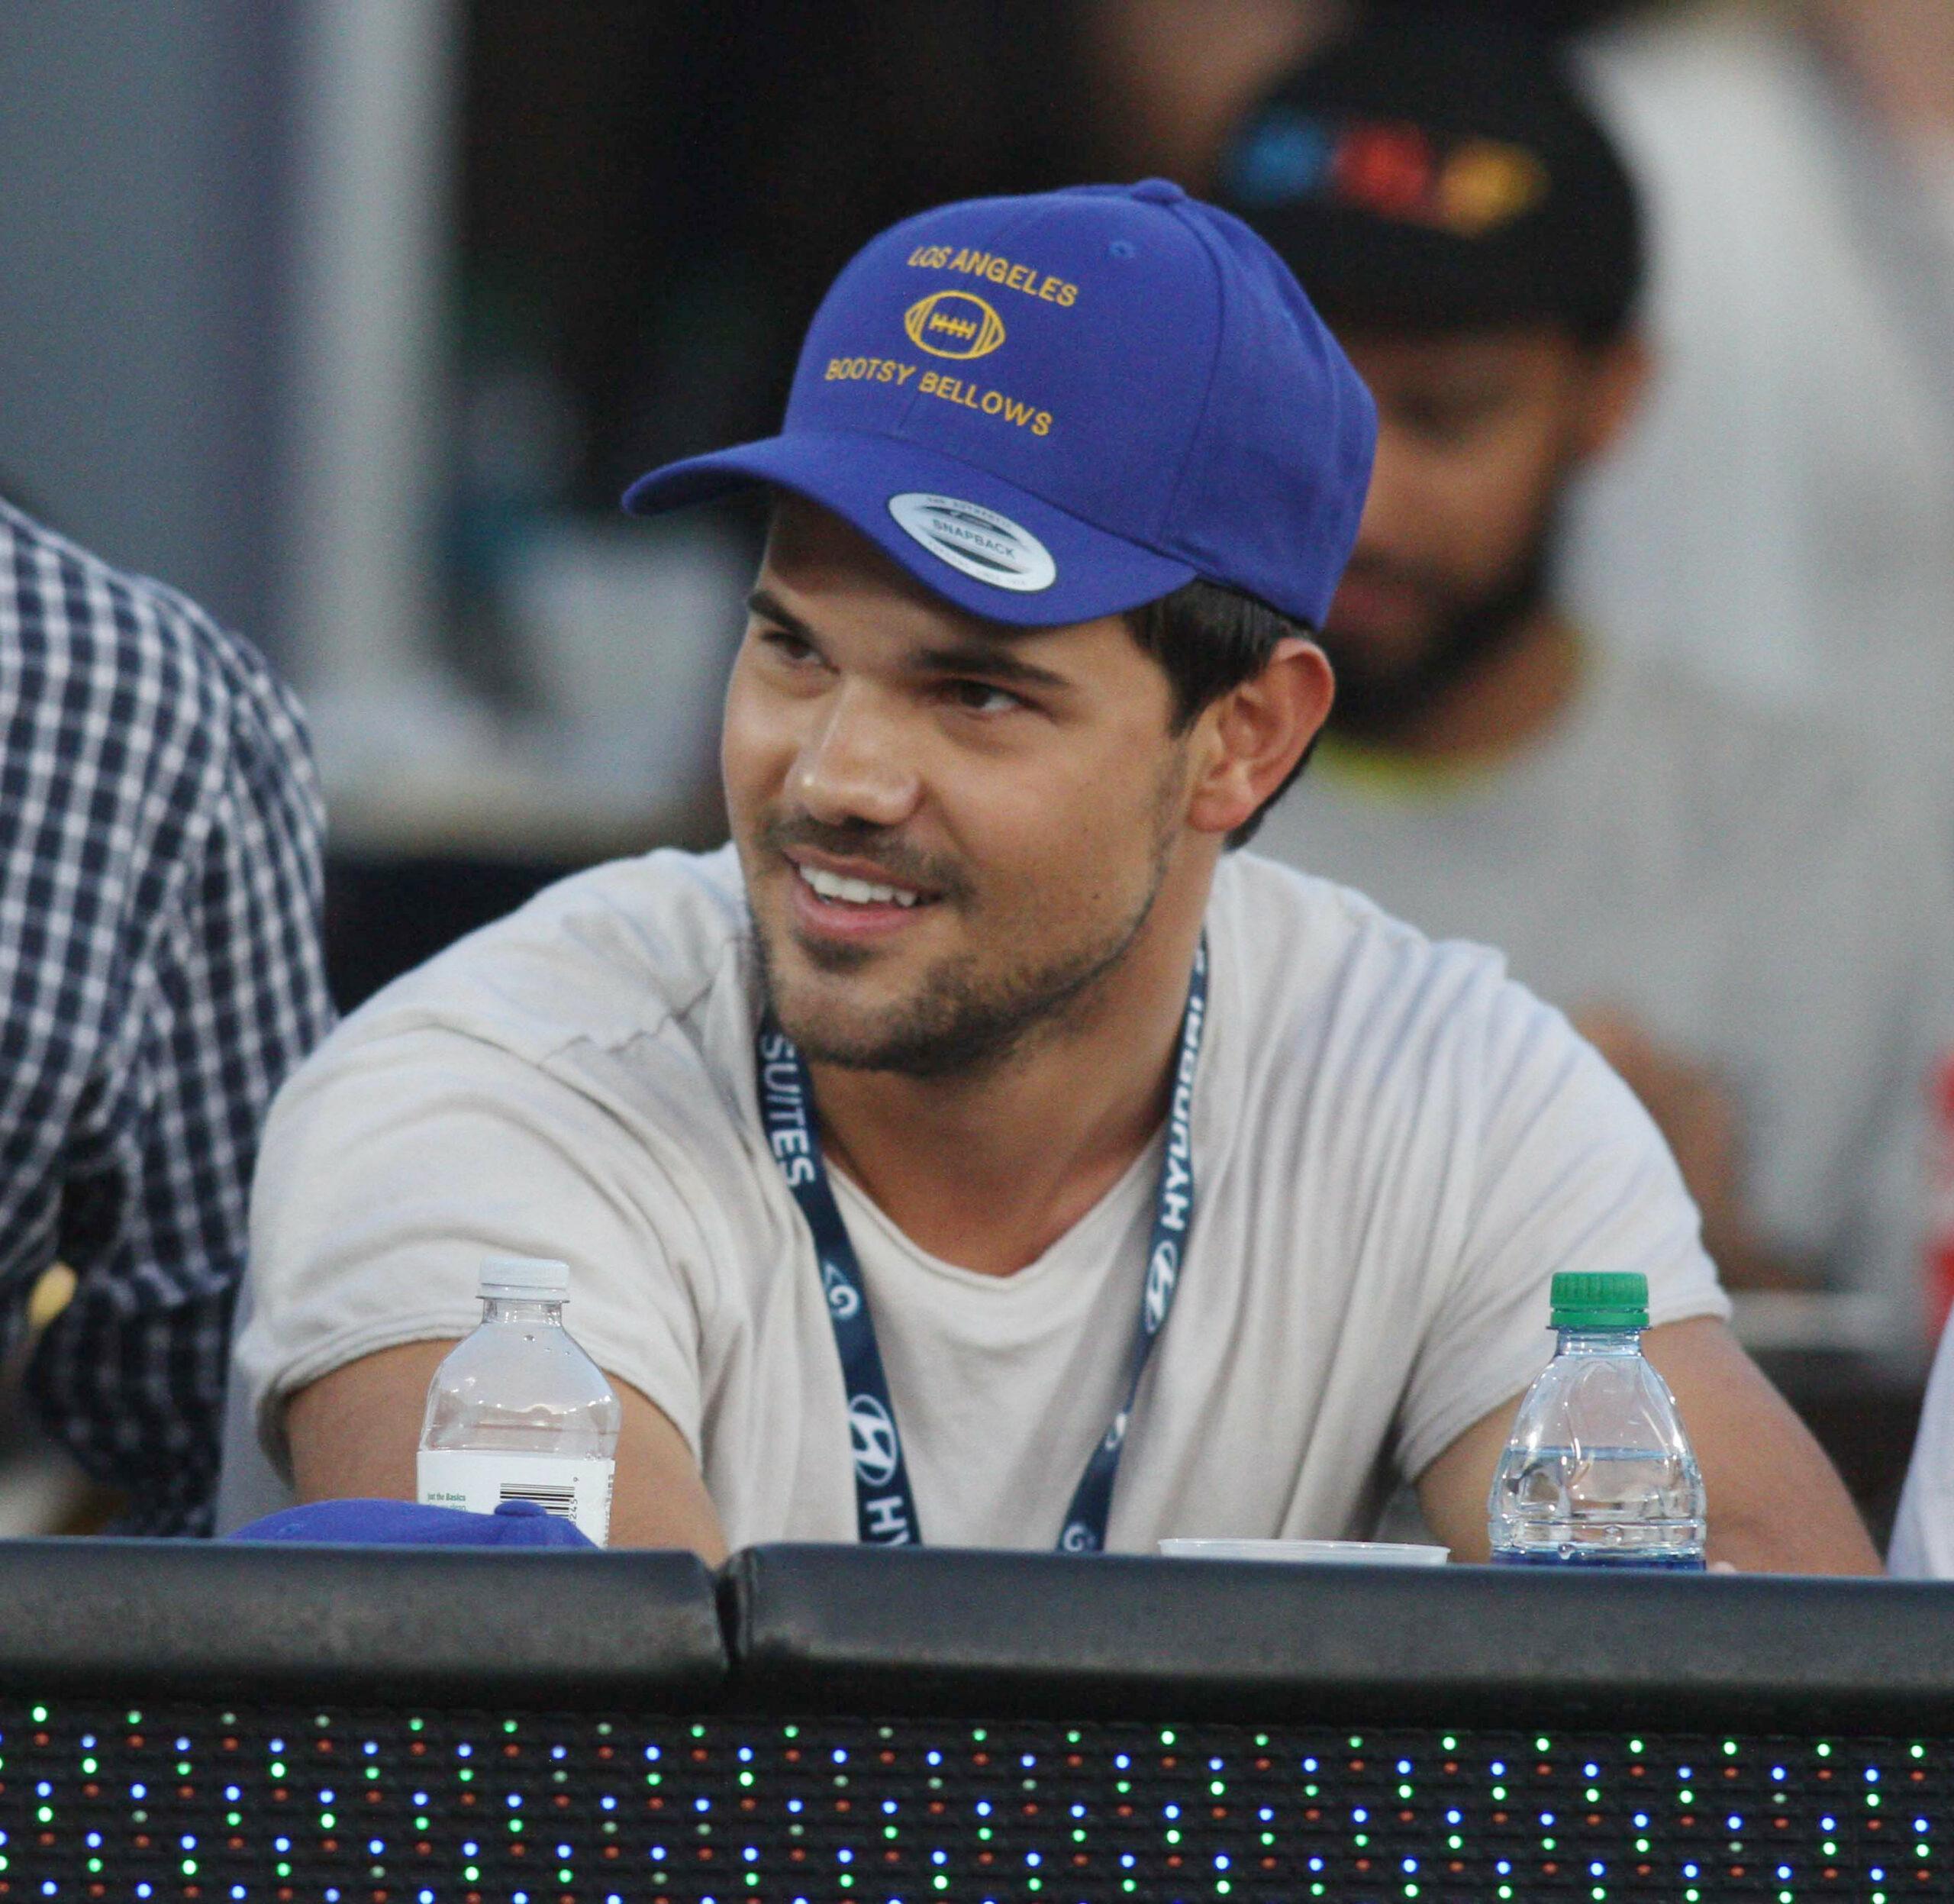 Celebrities at the Los Angeles Rams game